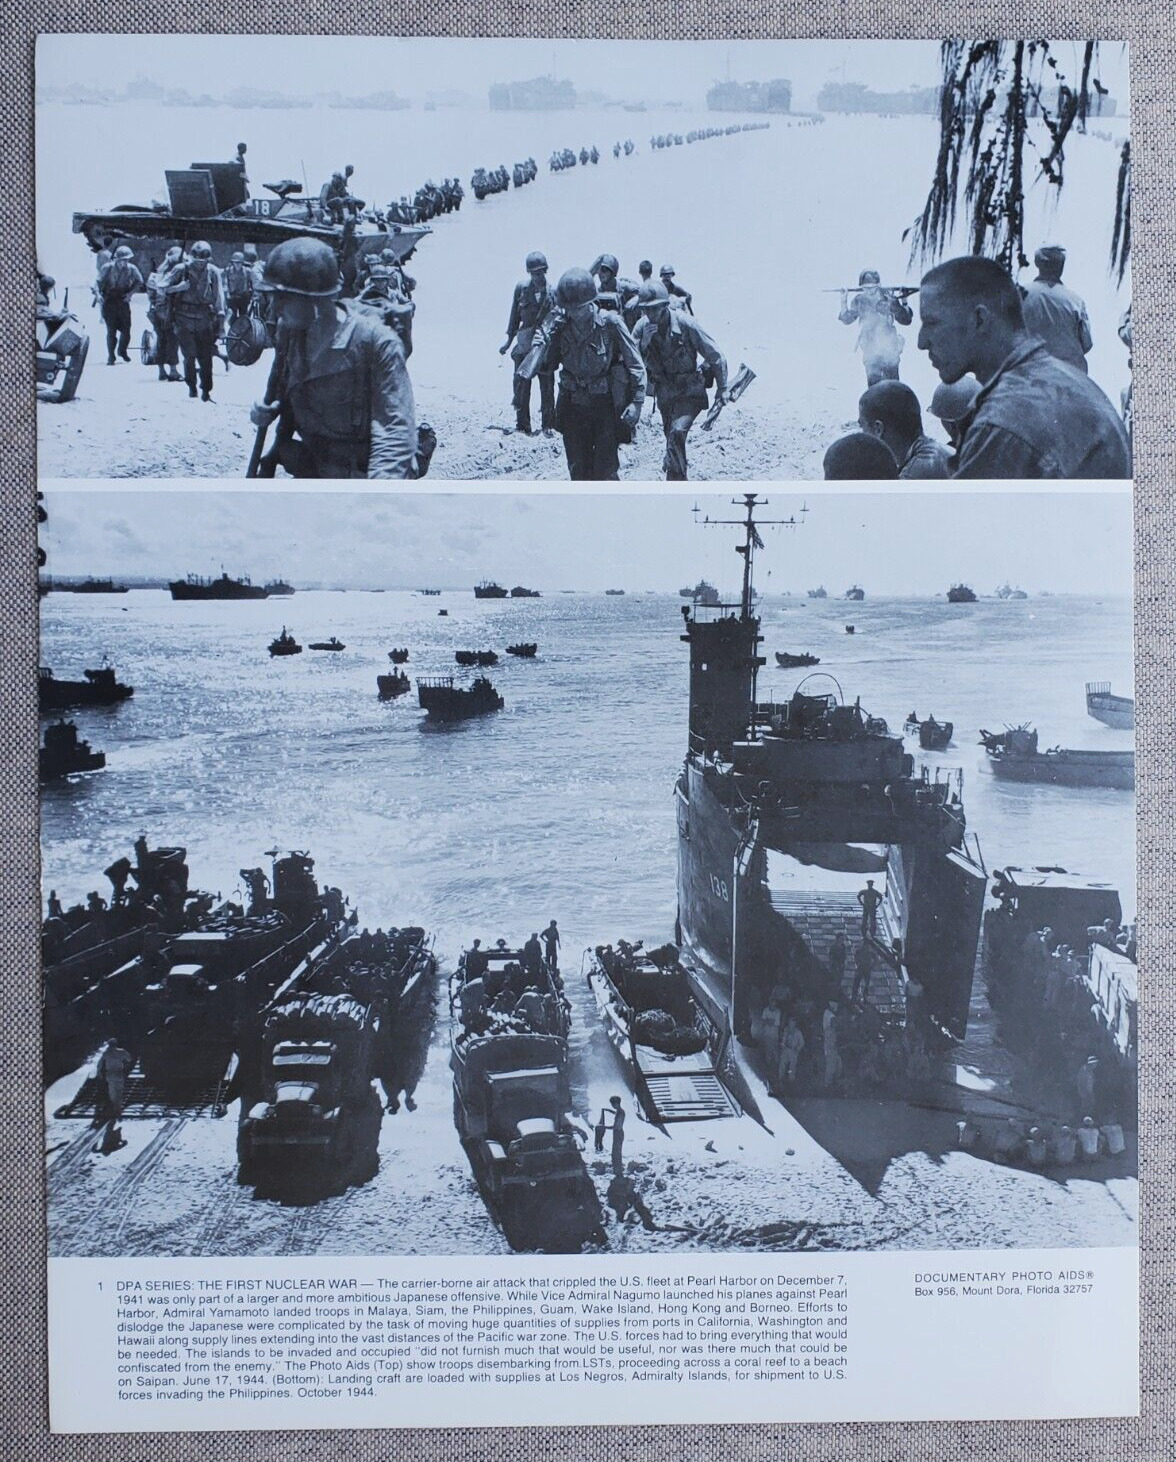 11x14 PHOTO WWII AMERICAN TROOPS ARRIVING IN SAIPAN / LANDING CRAFTS PHILIPPINES